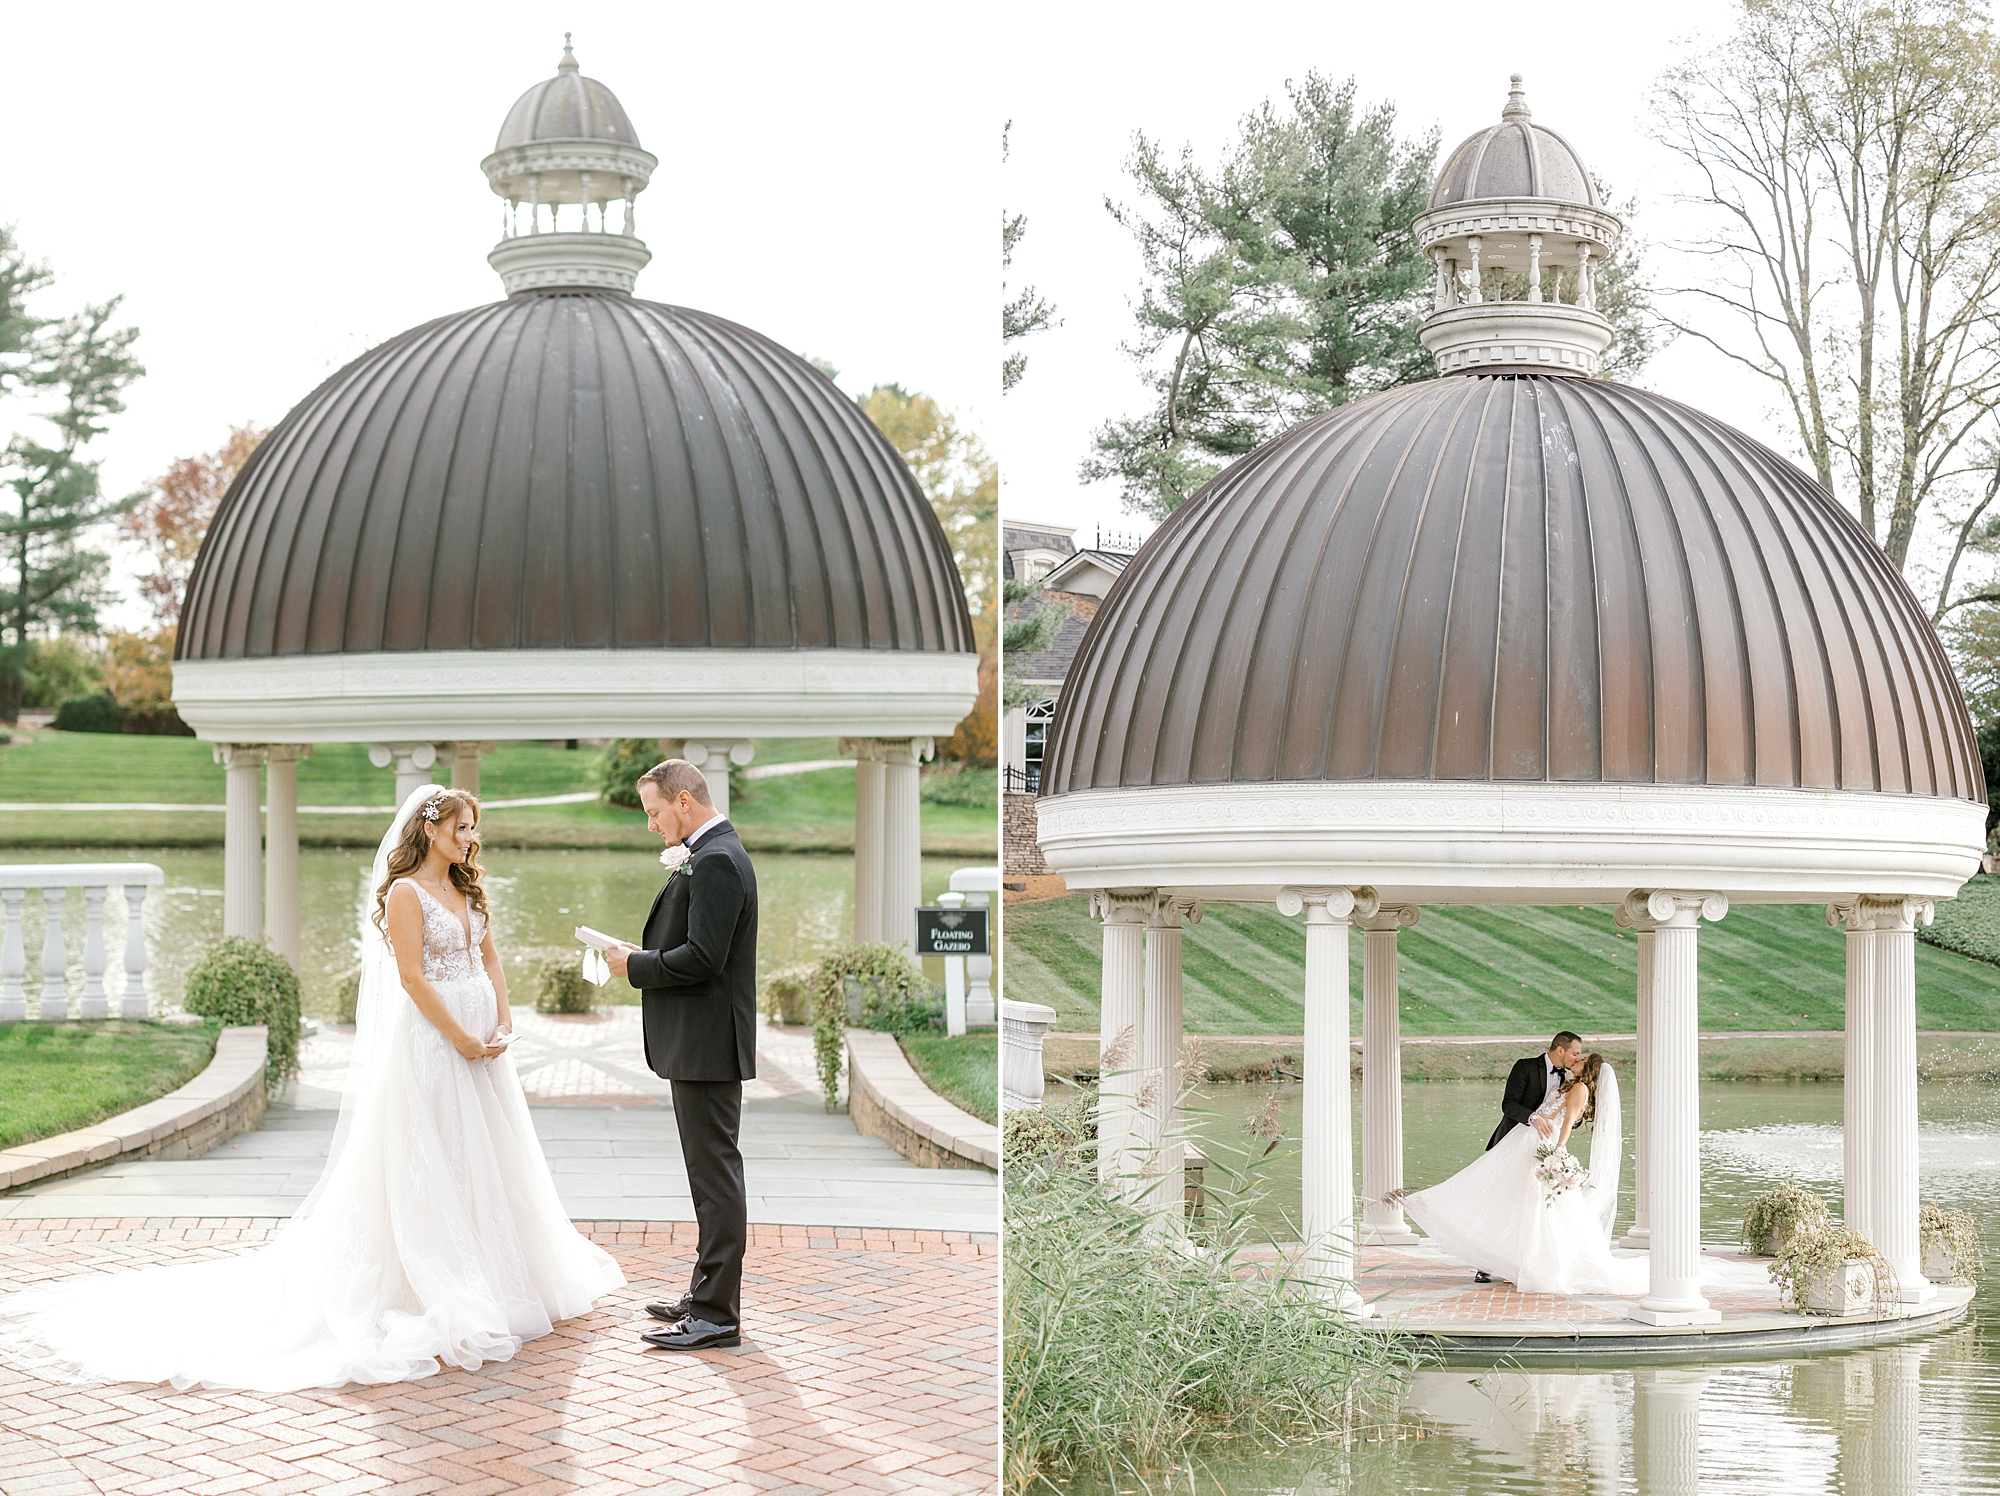 newlyweds read private vows under gazebo at the Ashford Estate